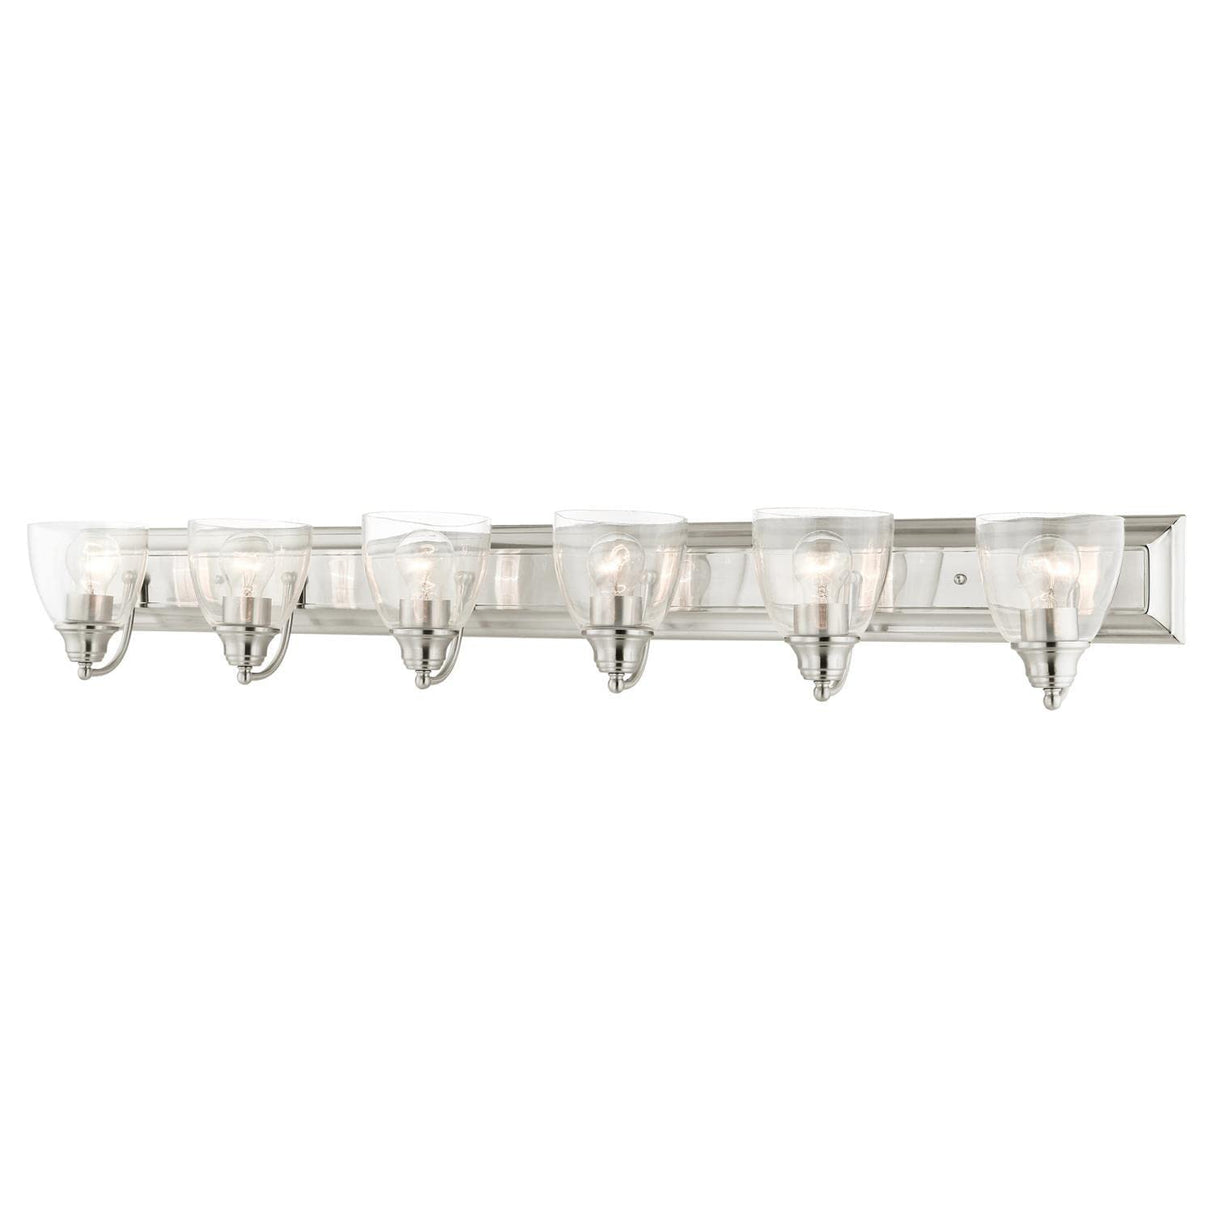 Livex Lighting 17076-91 Birmingham Collection 6-Light Bathroom Vanity Light with Clear Glass, Brushed Nickel